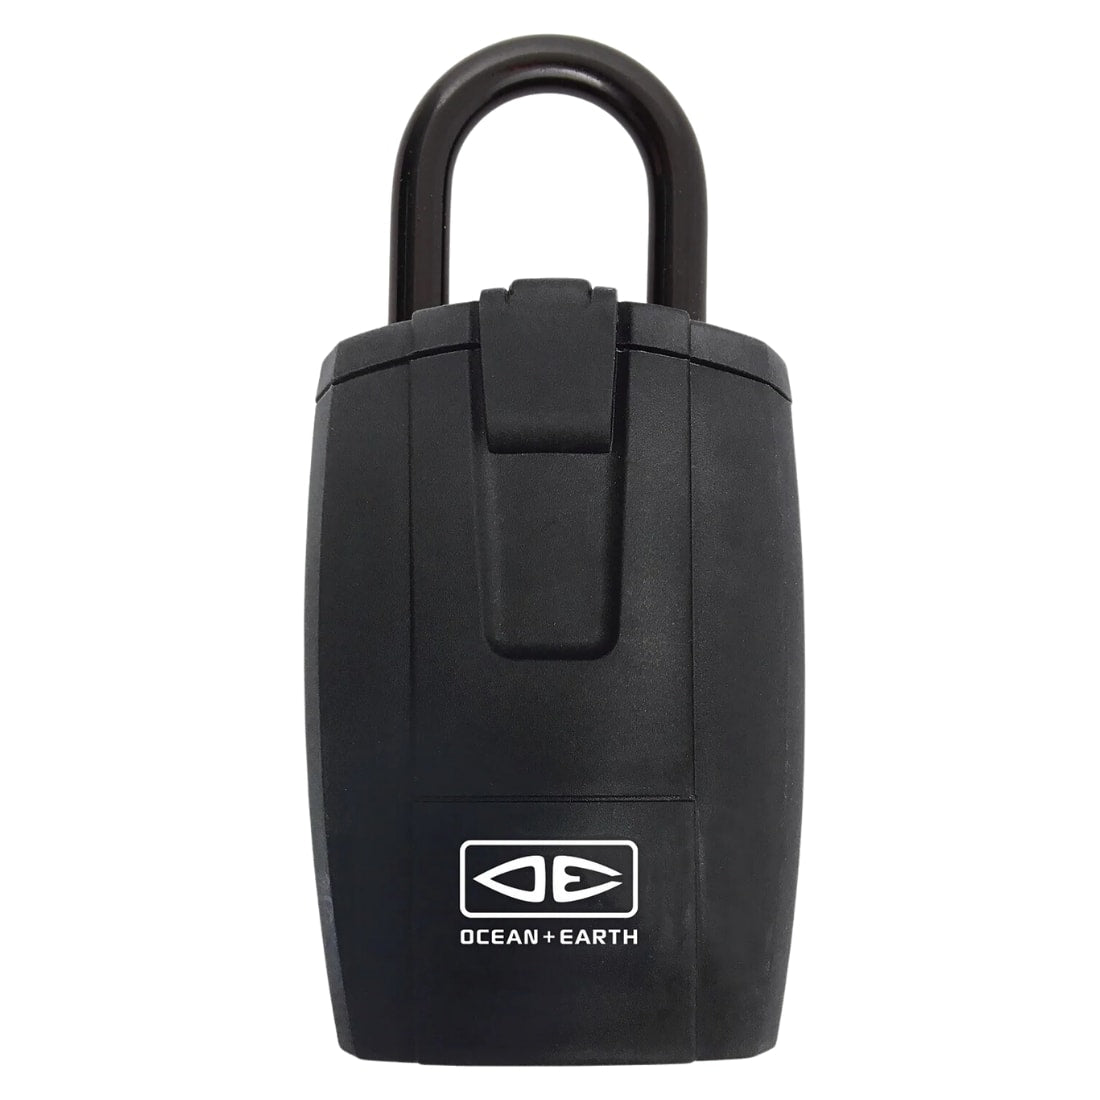 Ocean And Earth Heavy Duty Key Bank Lock - Black - Gifts for Surfers by Ocean and Earth